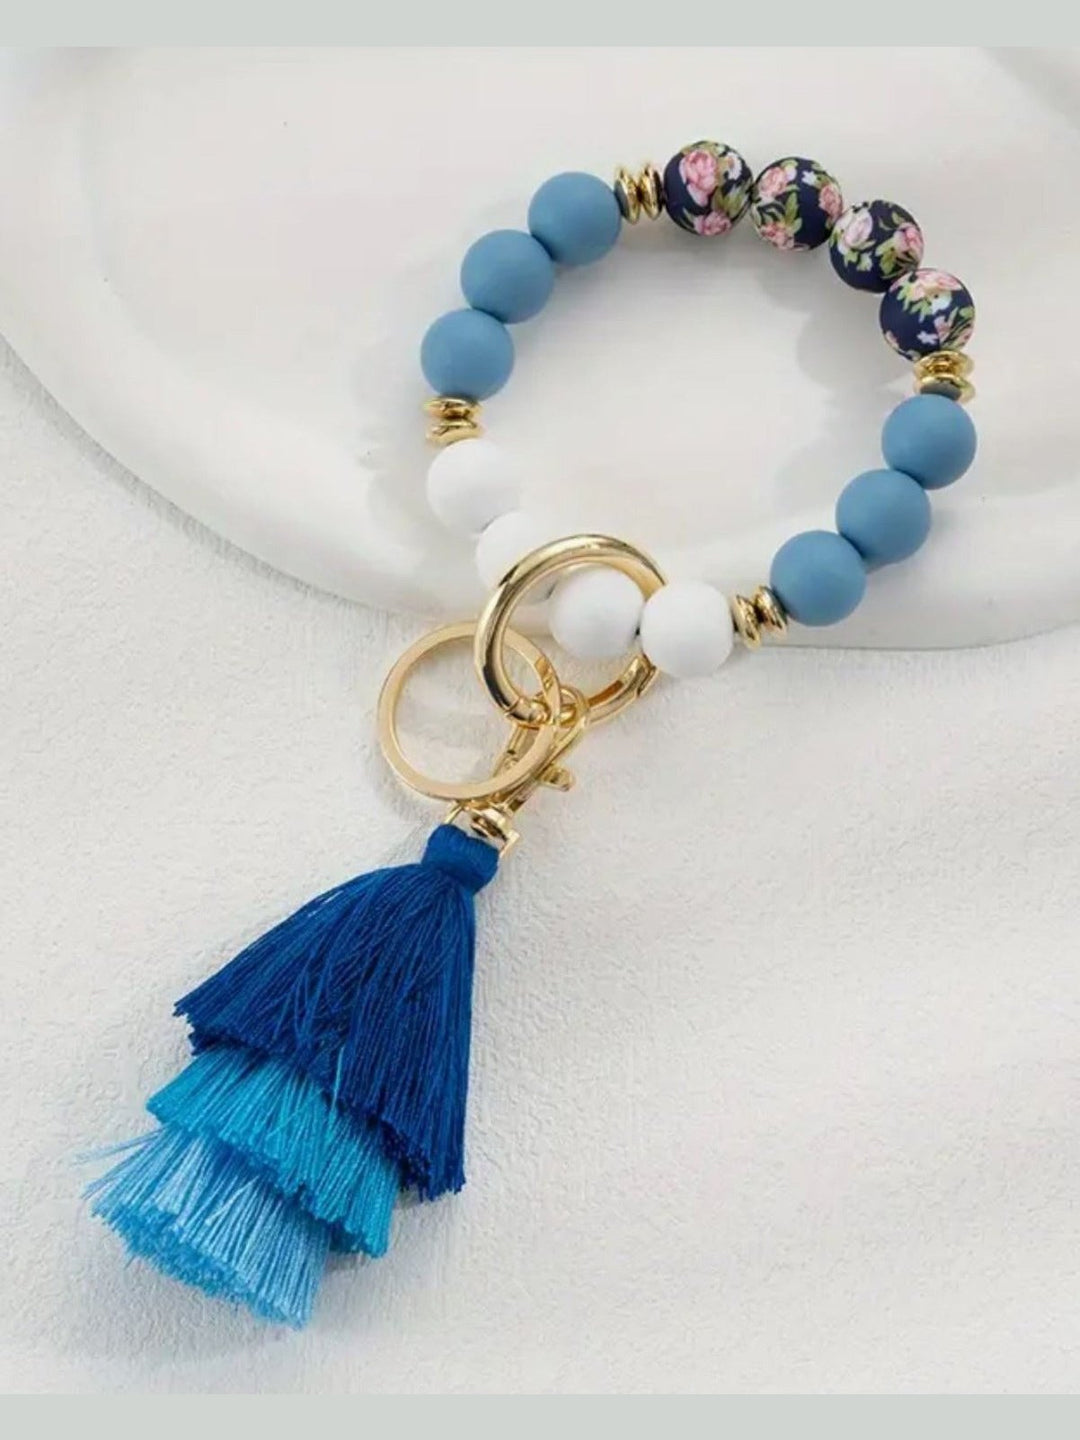 Floral Silicone Key Rings with Tassels - 2 Colors - Lolo Viv Boutique